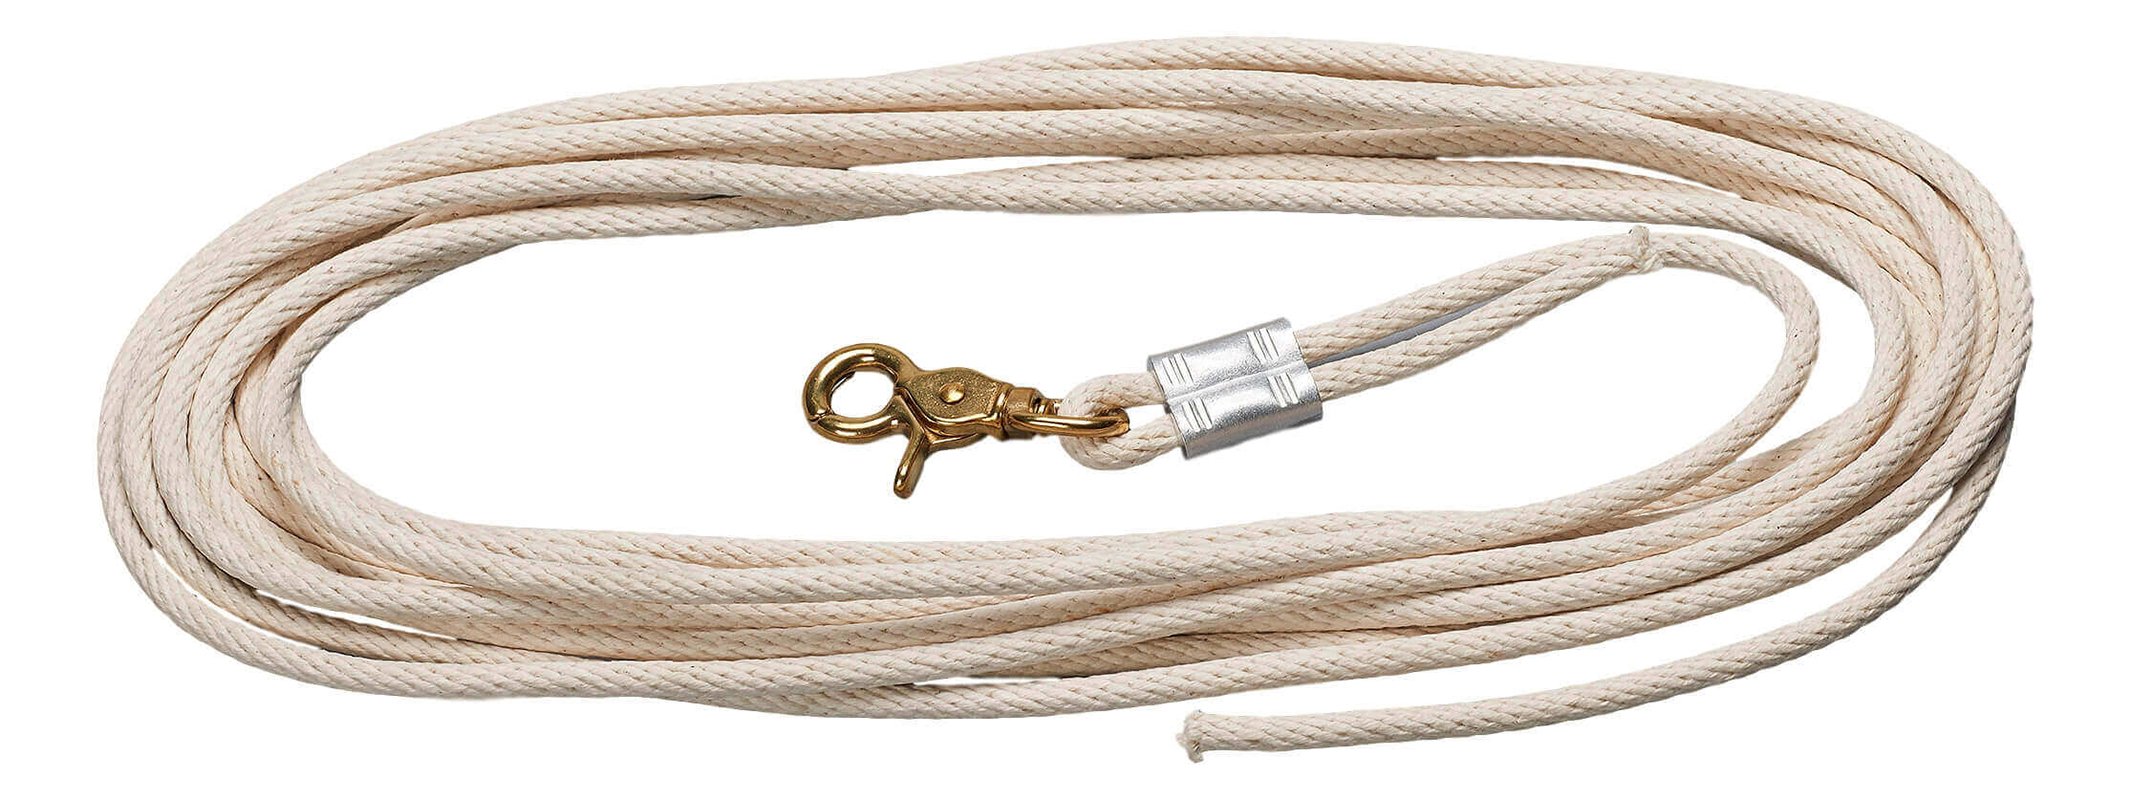 27673-066 Thief Rope Plain with Fittings, 66'